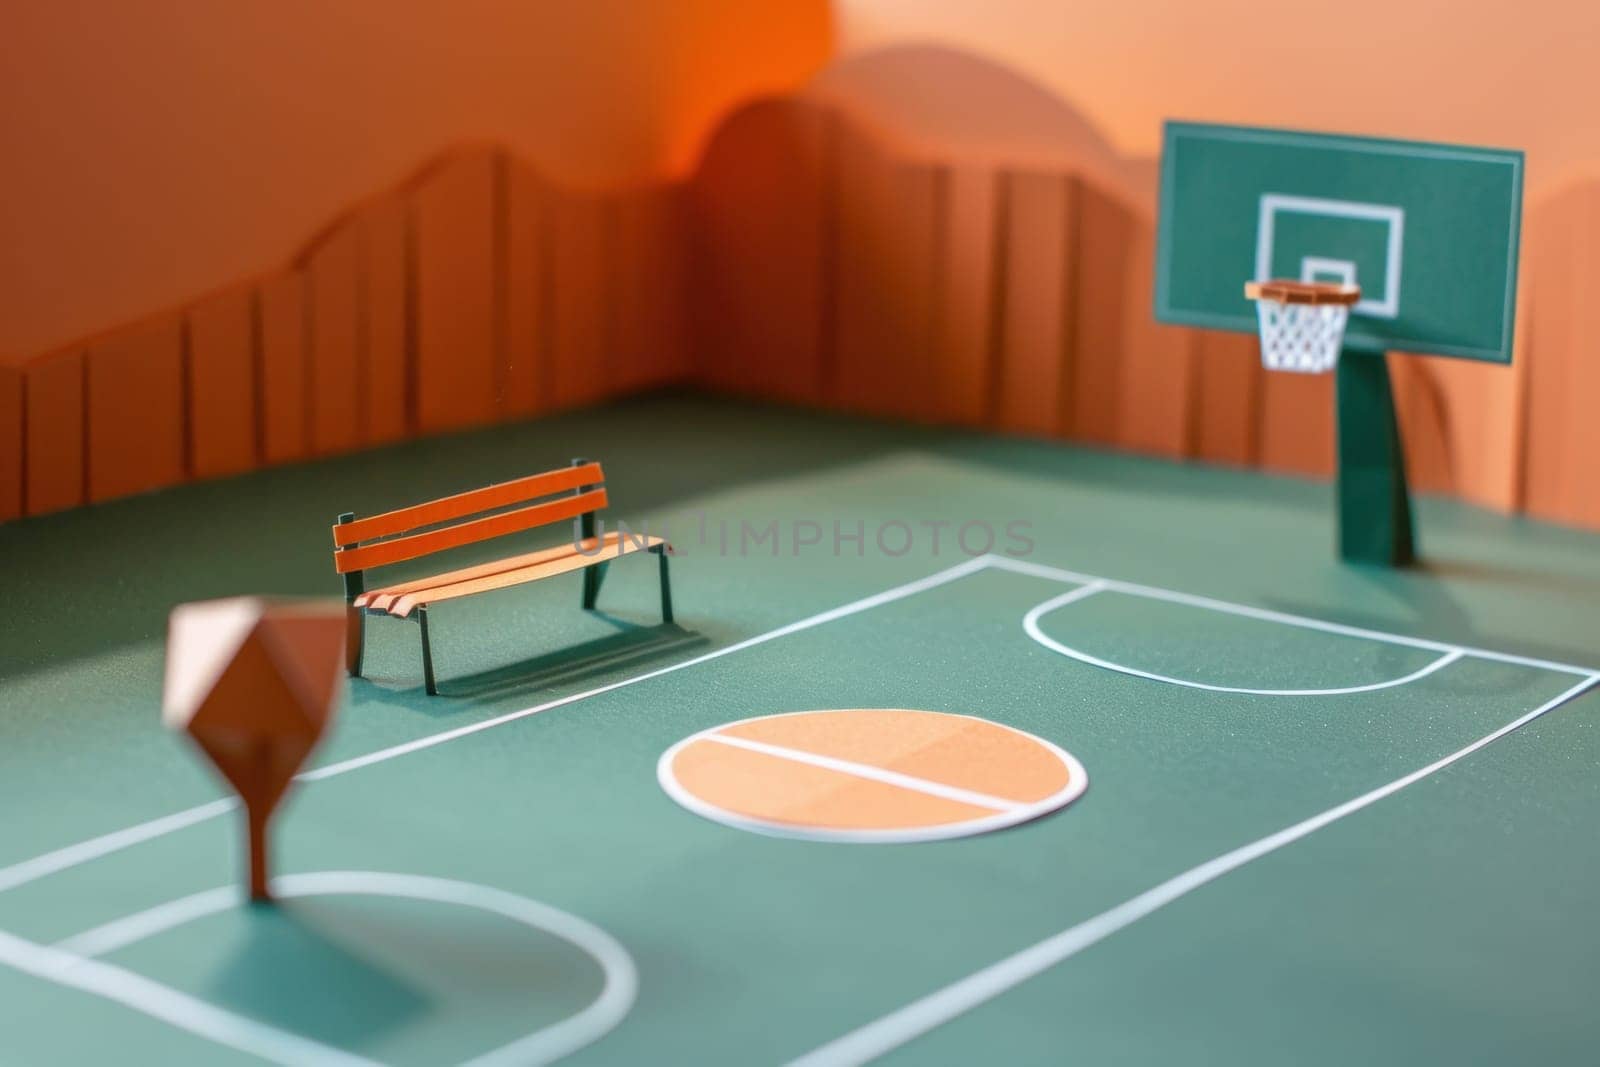 Paper model of basketball court with bench and basketball hoop for sports and recreation enthusiasts